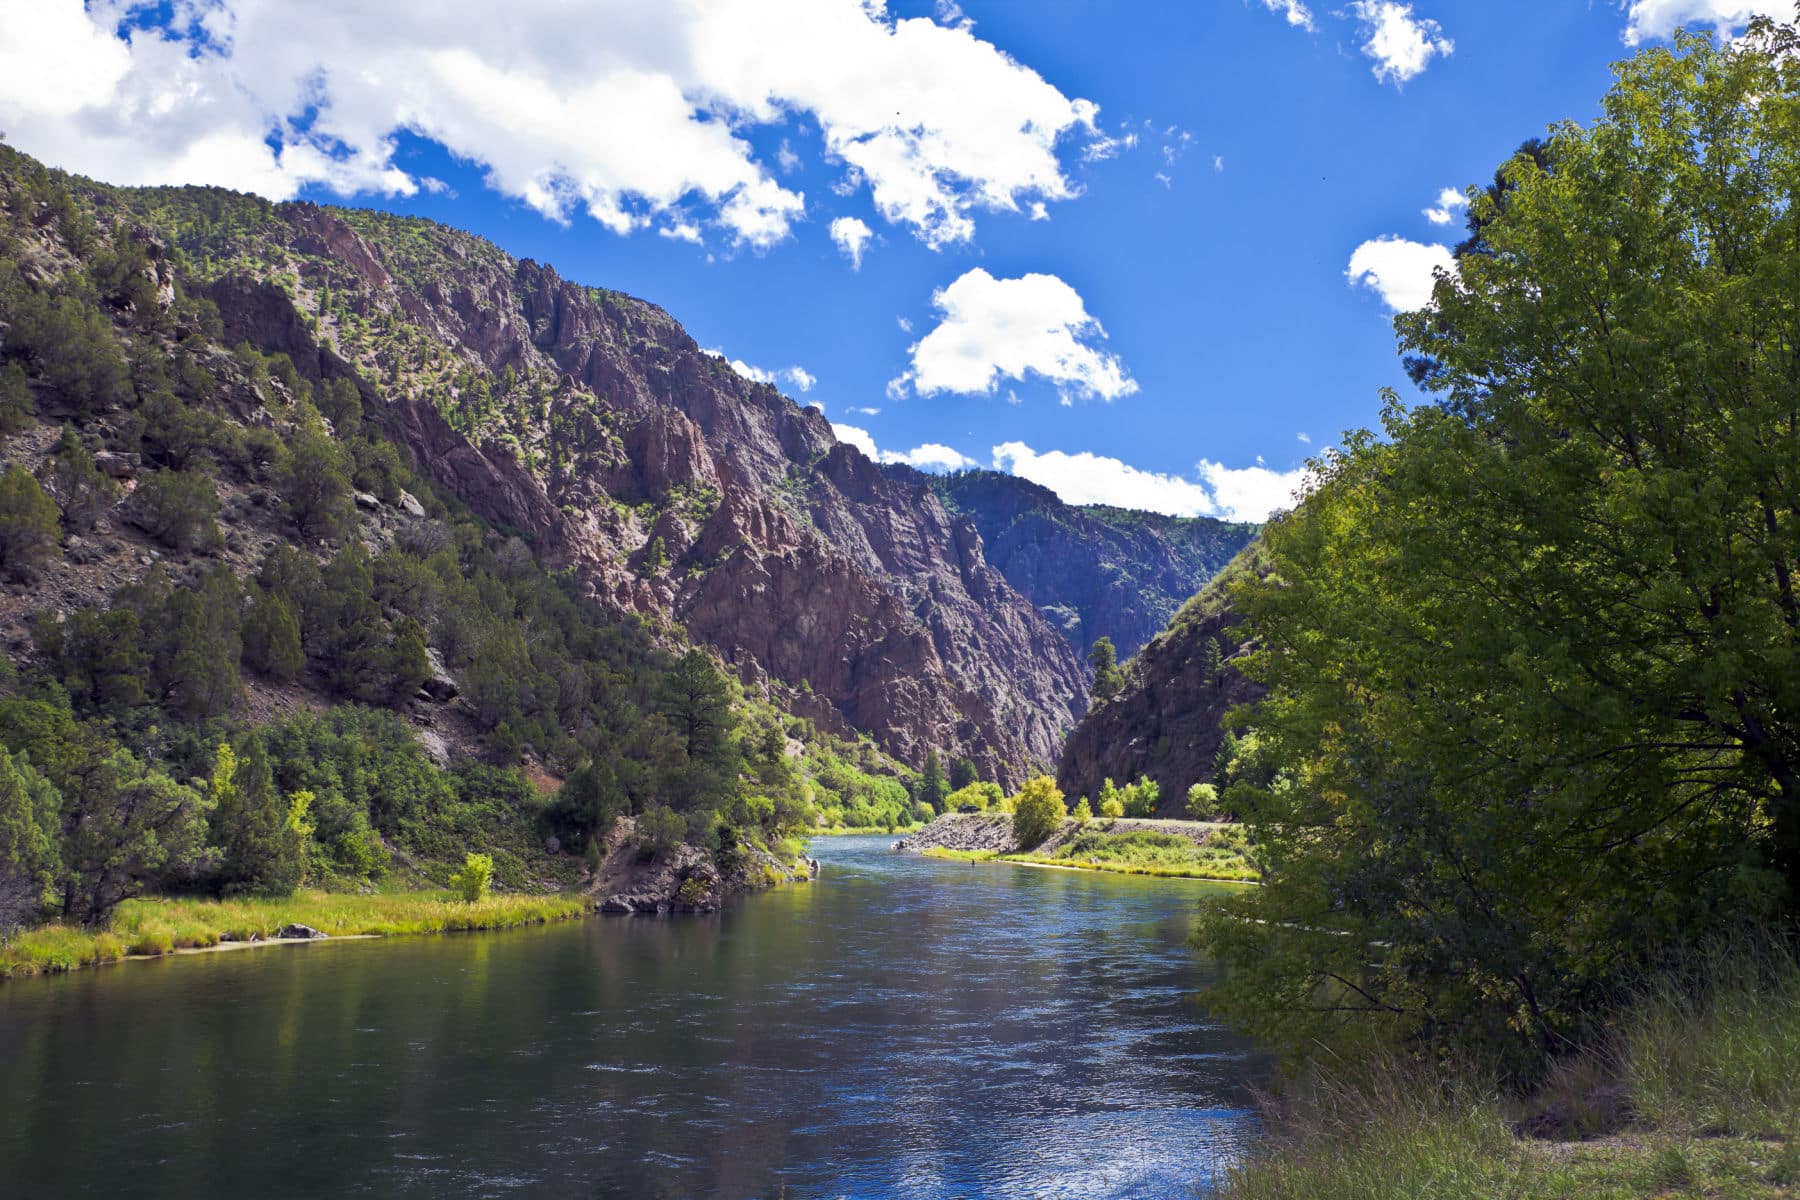 Black Canyon of the Gunnison Facts